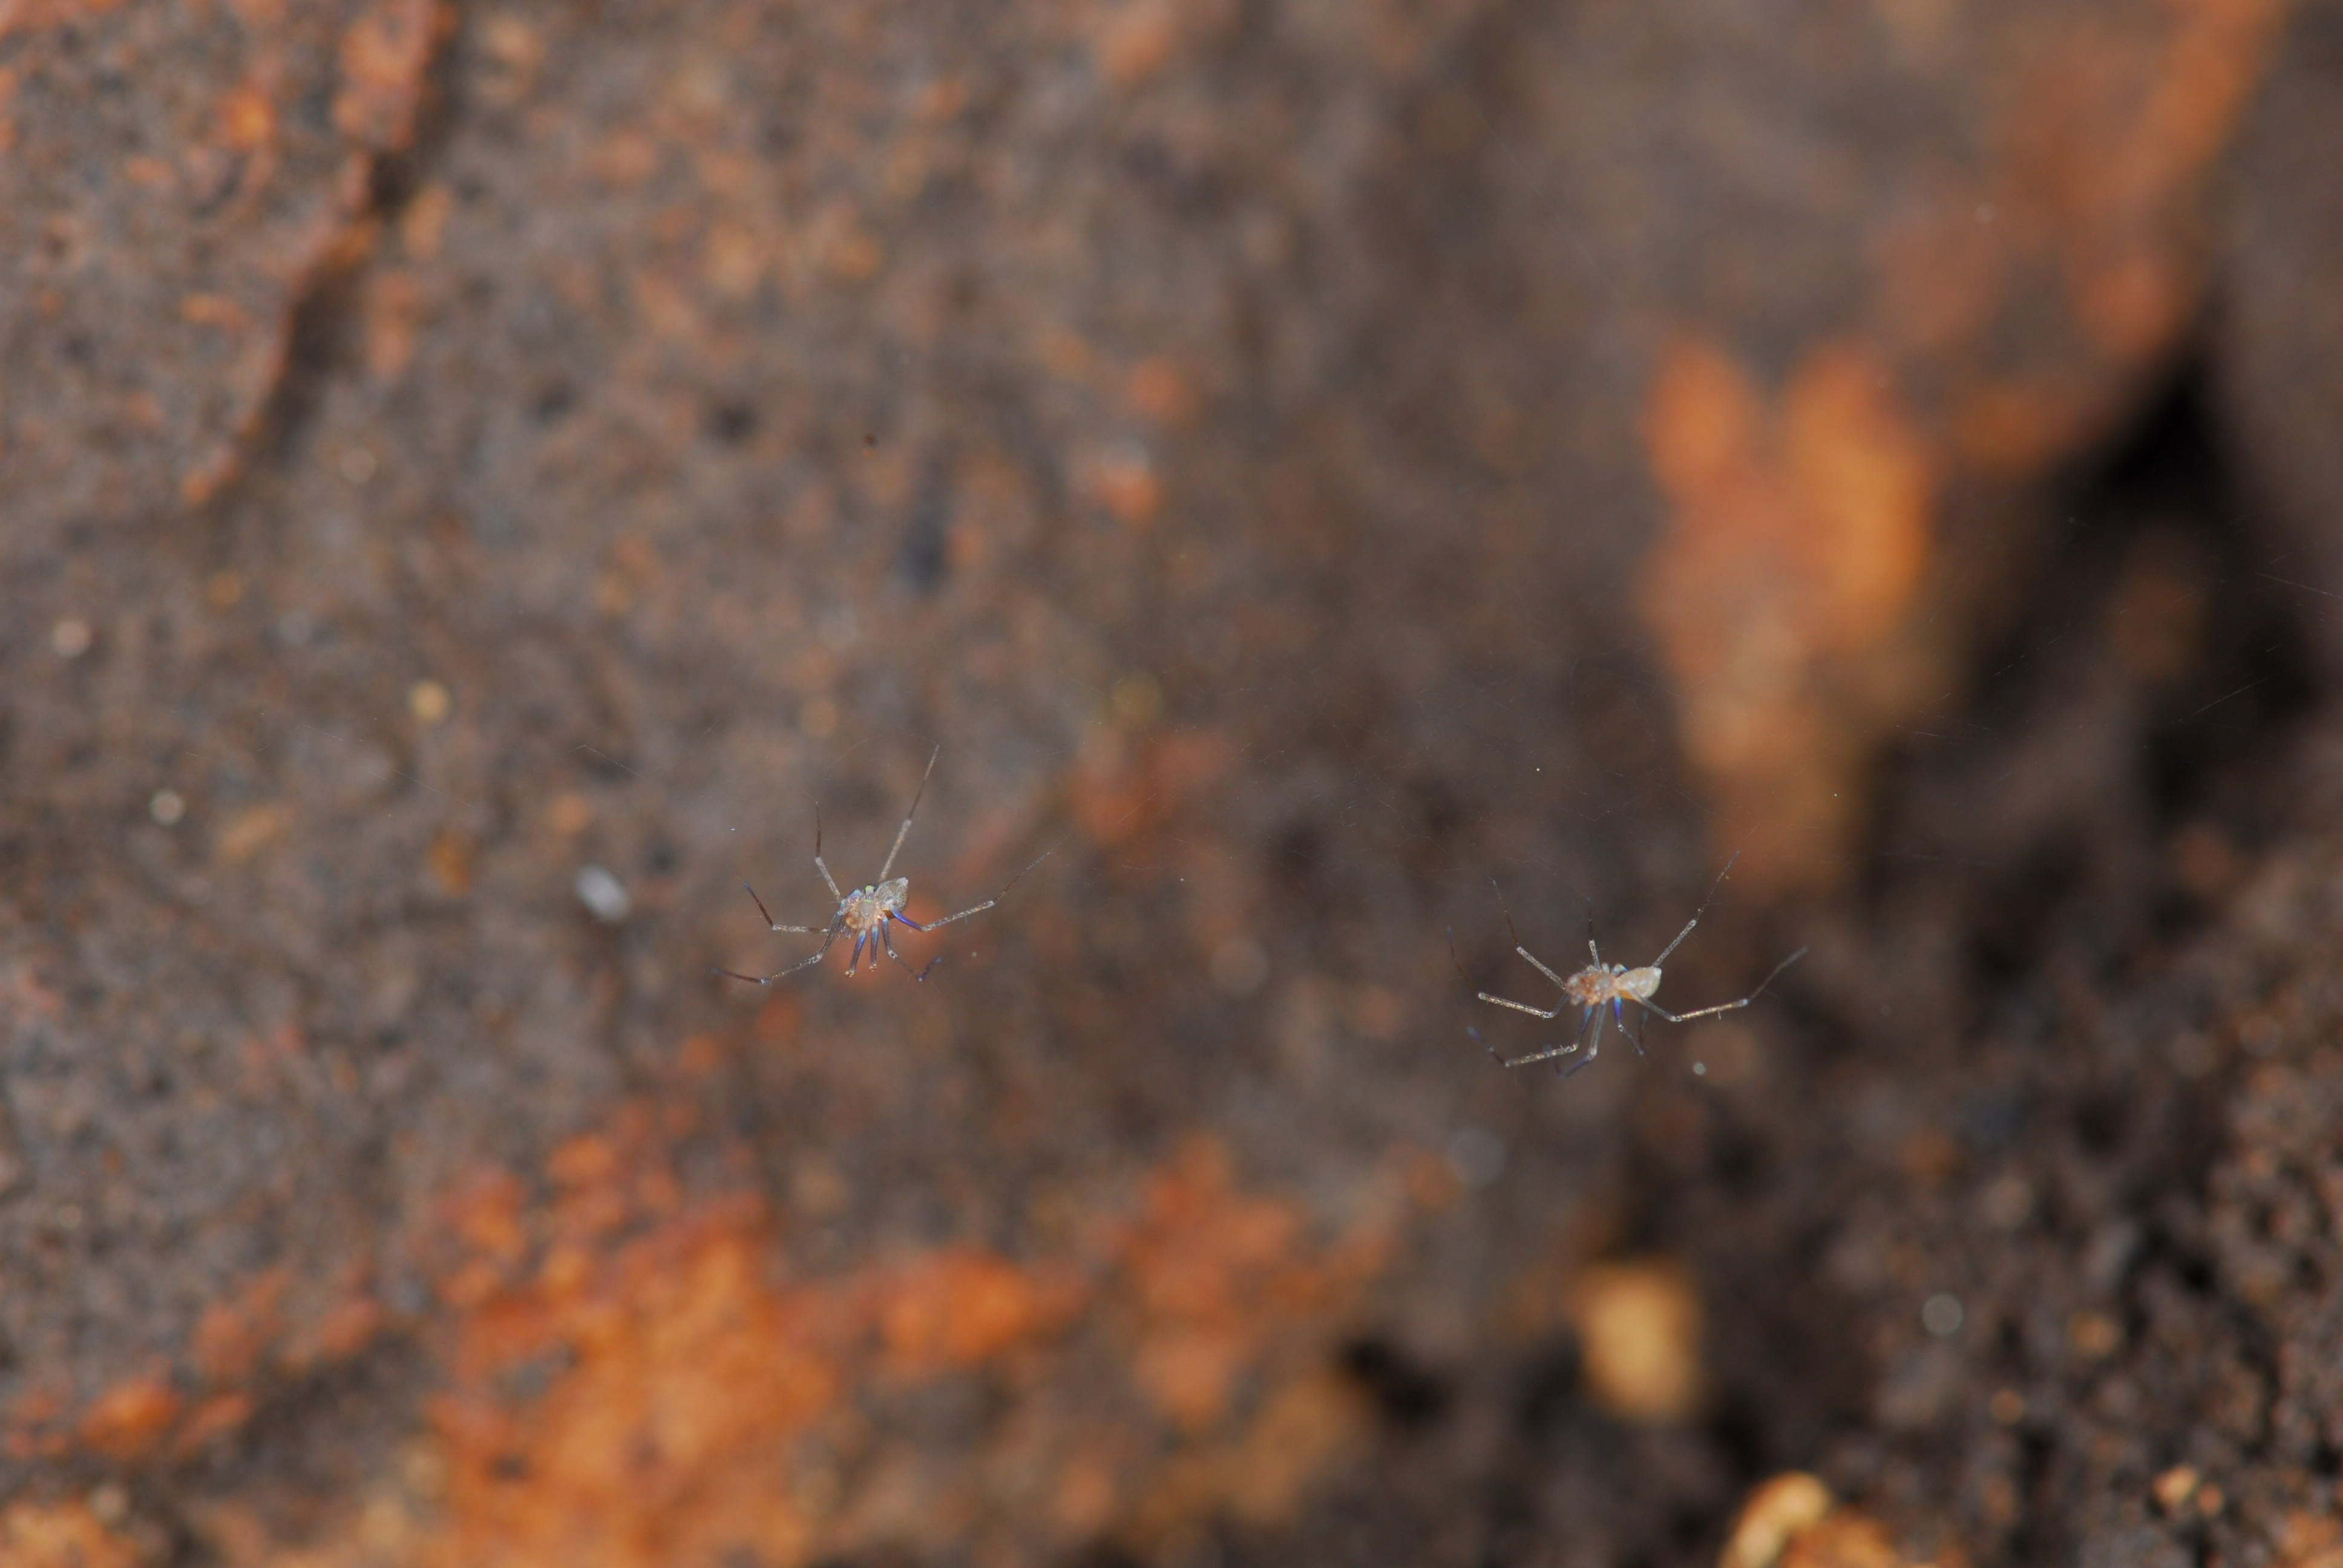 pair of tiny Neoleptoneta sp. spiders from Fawcetts Cave,  photo
by Joel Ledford